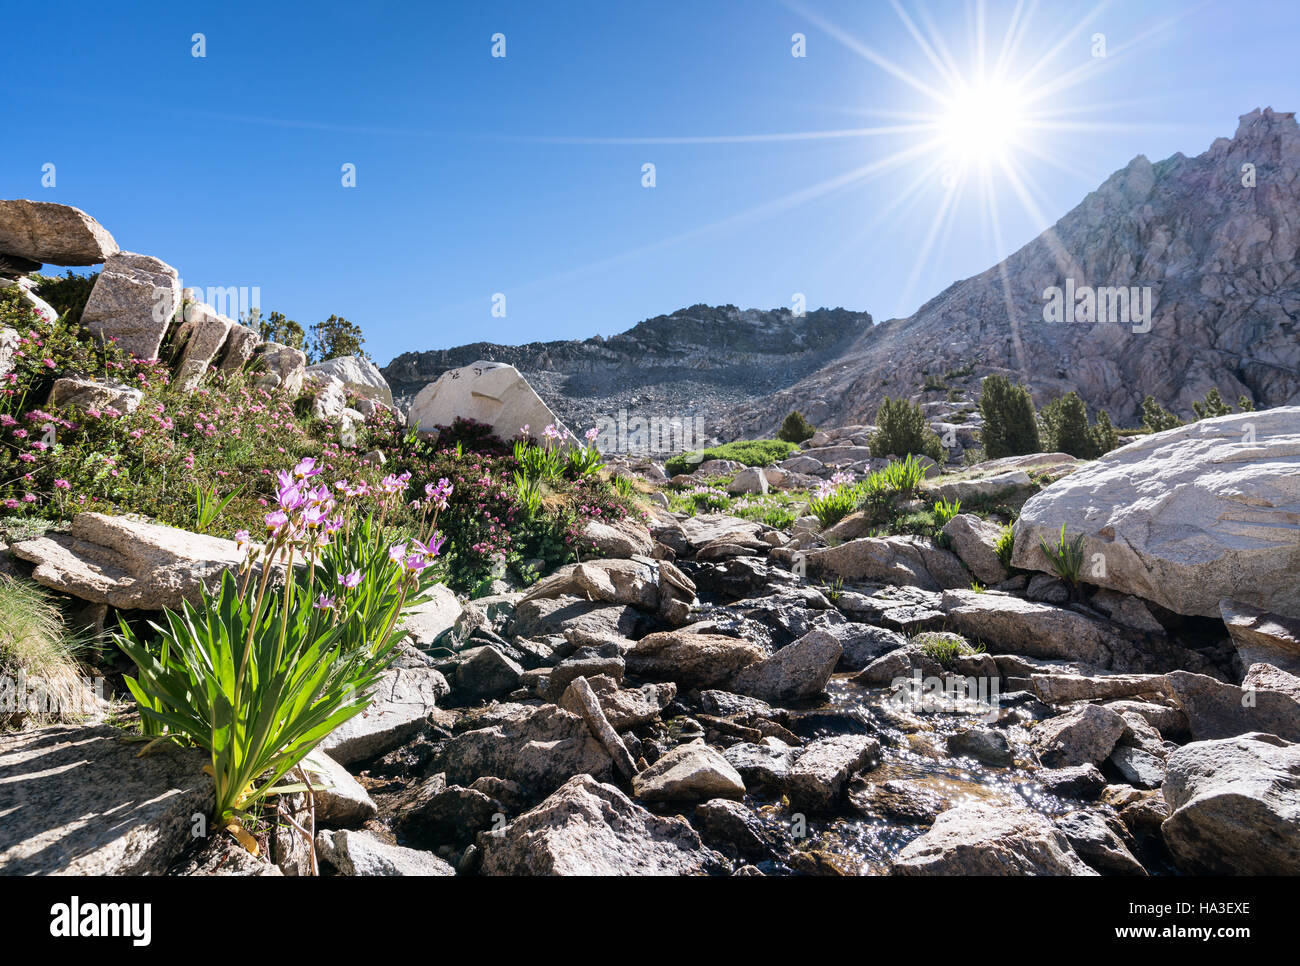 Blooming flowers along John Muir Trail, Kings Canyon National Park, California, United States of America, North America Stock Photo